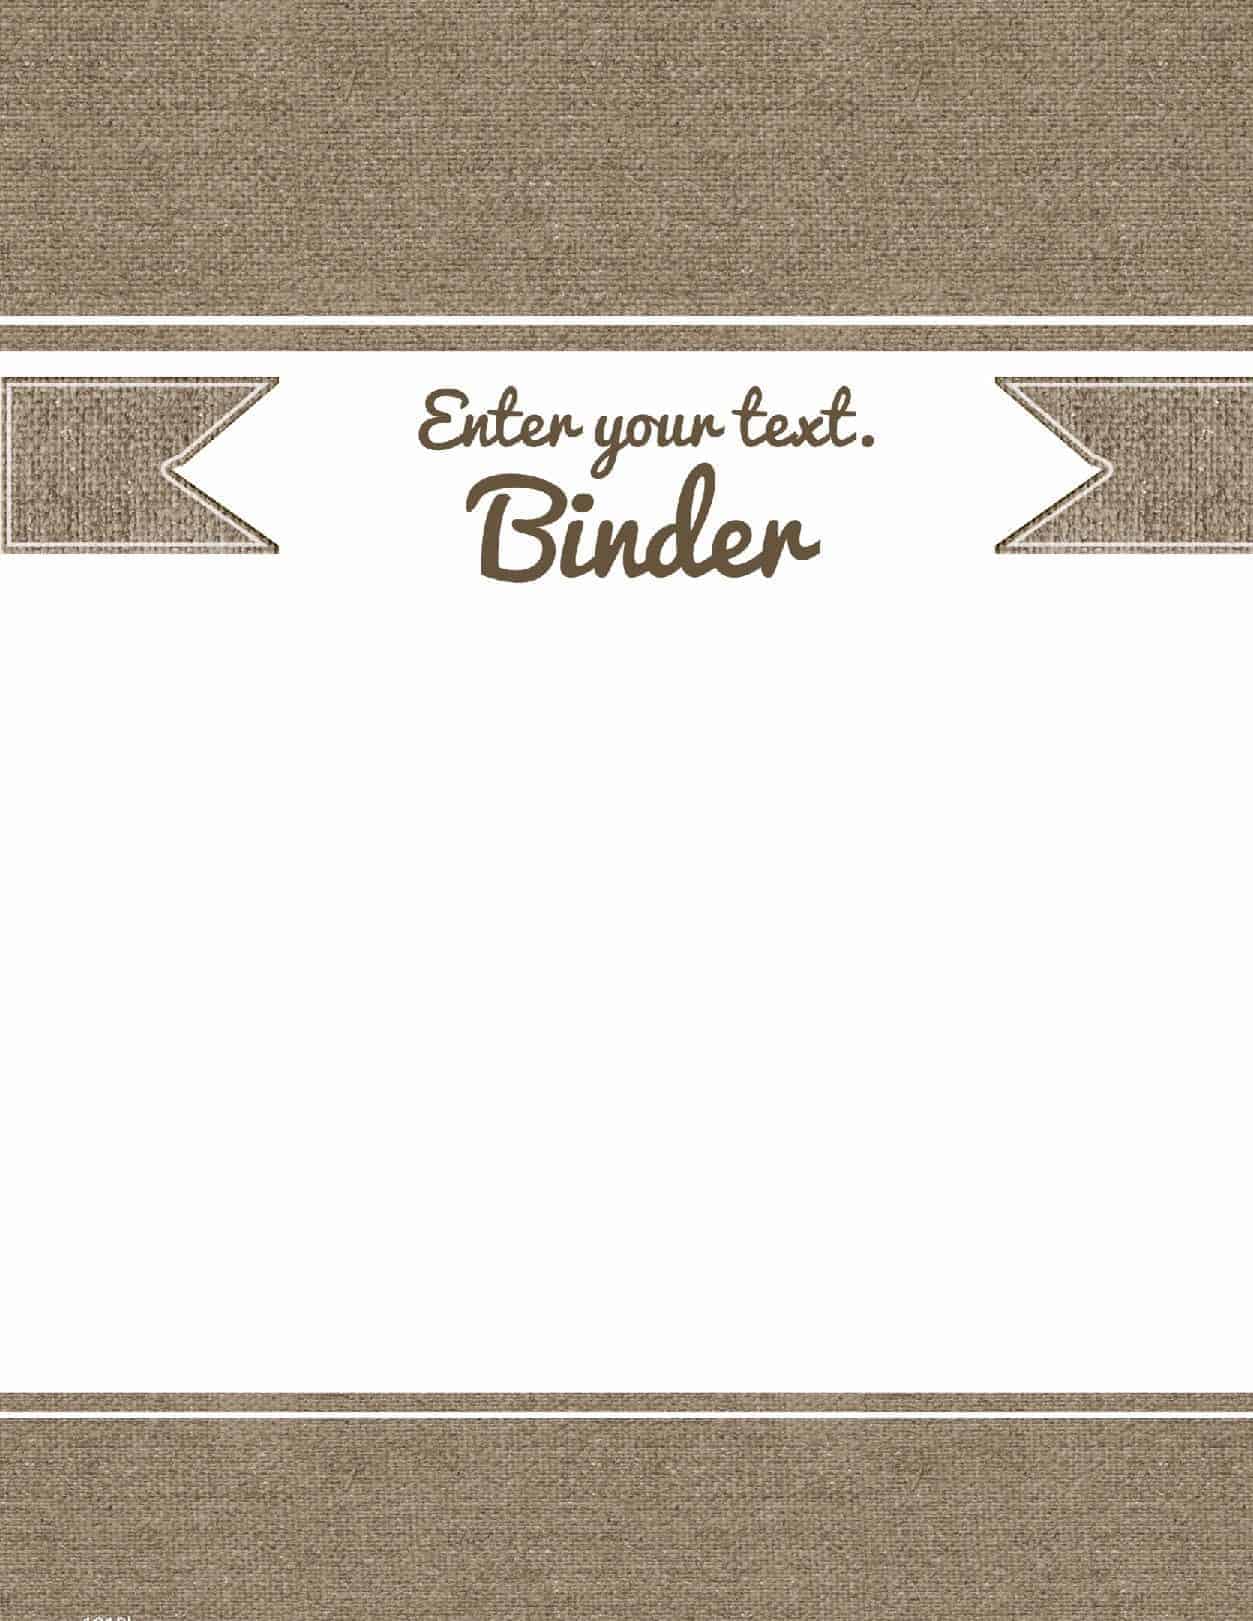 Free Binder Cover Templates Customize Online Print At Home Free 